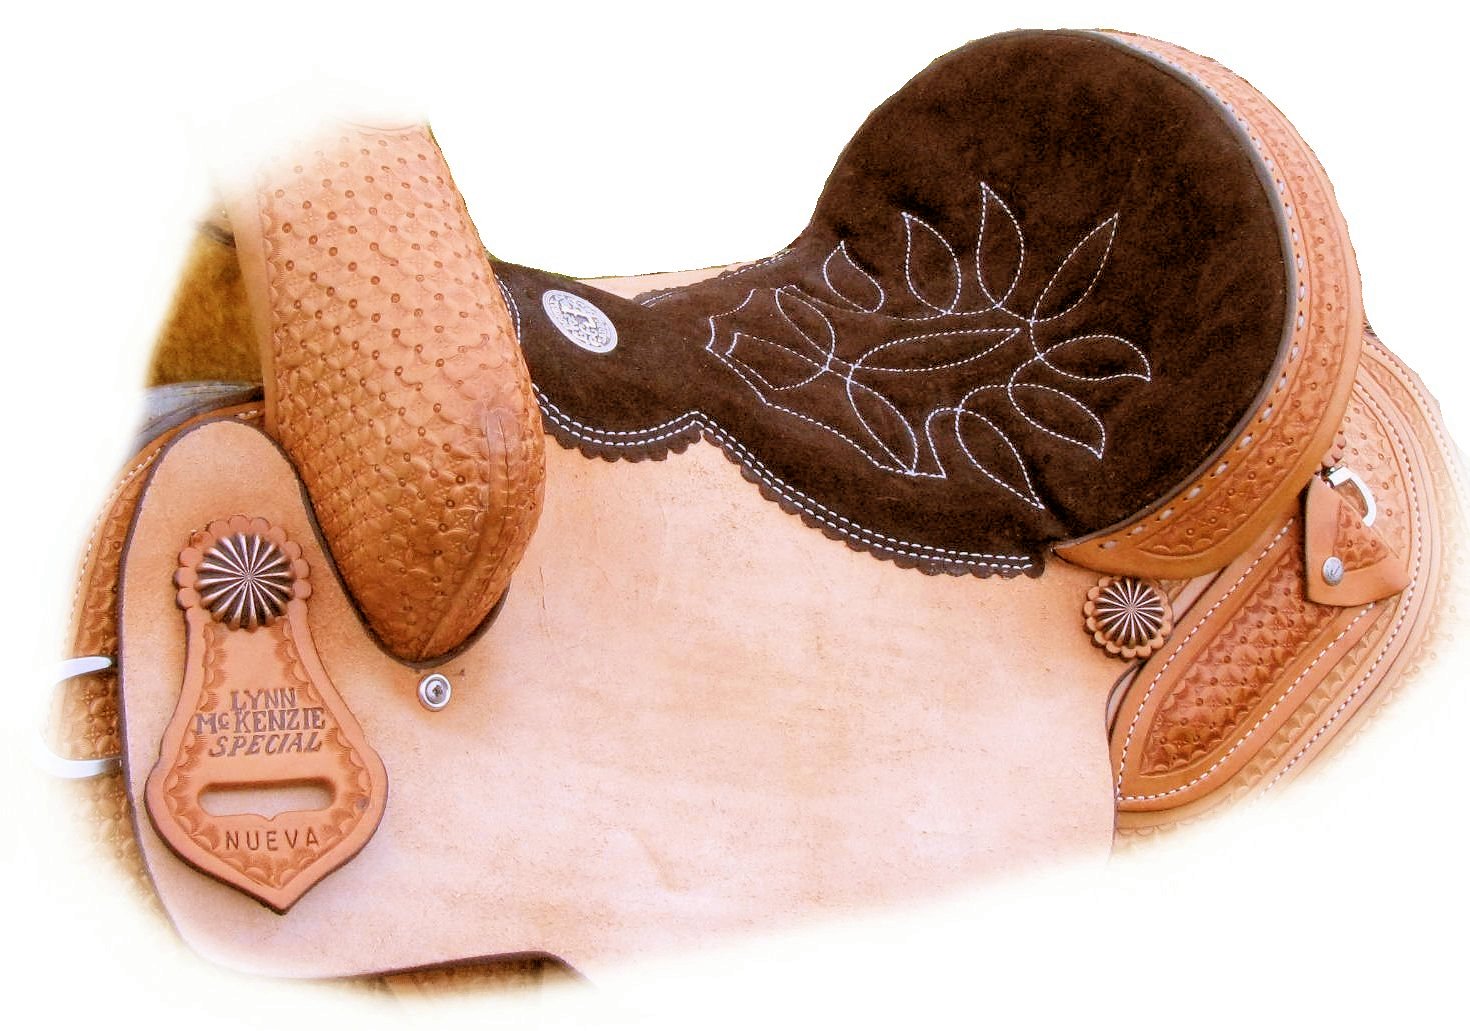 LM Nueva with chocolate suede seat and parachute conchos